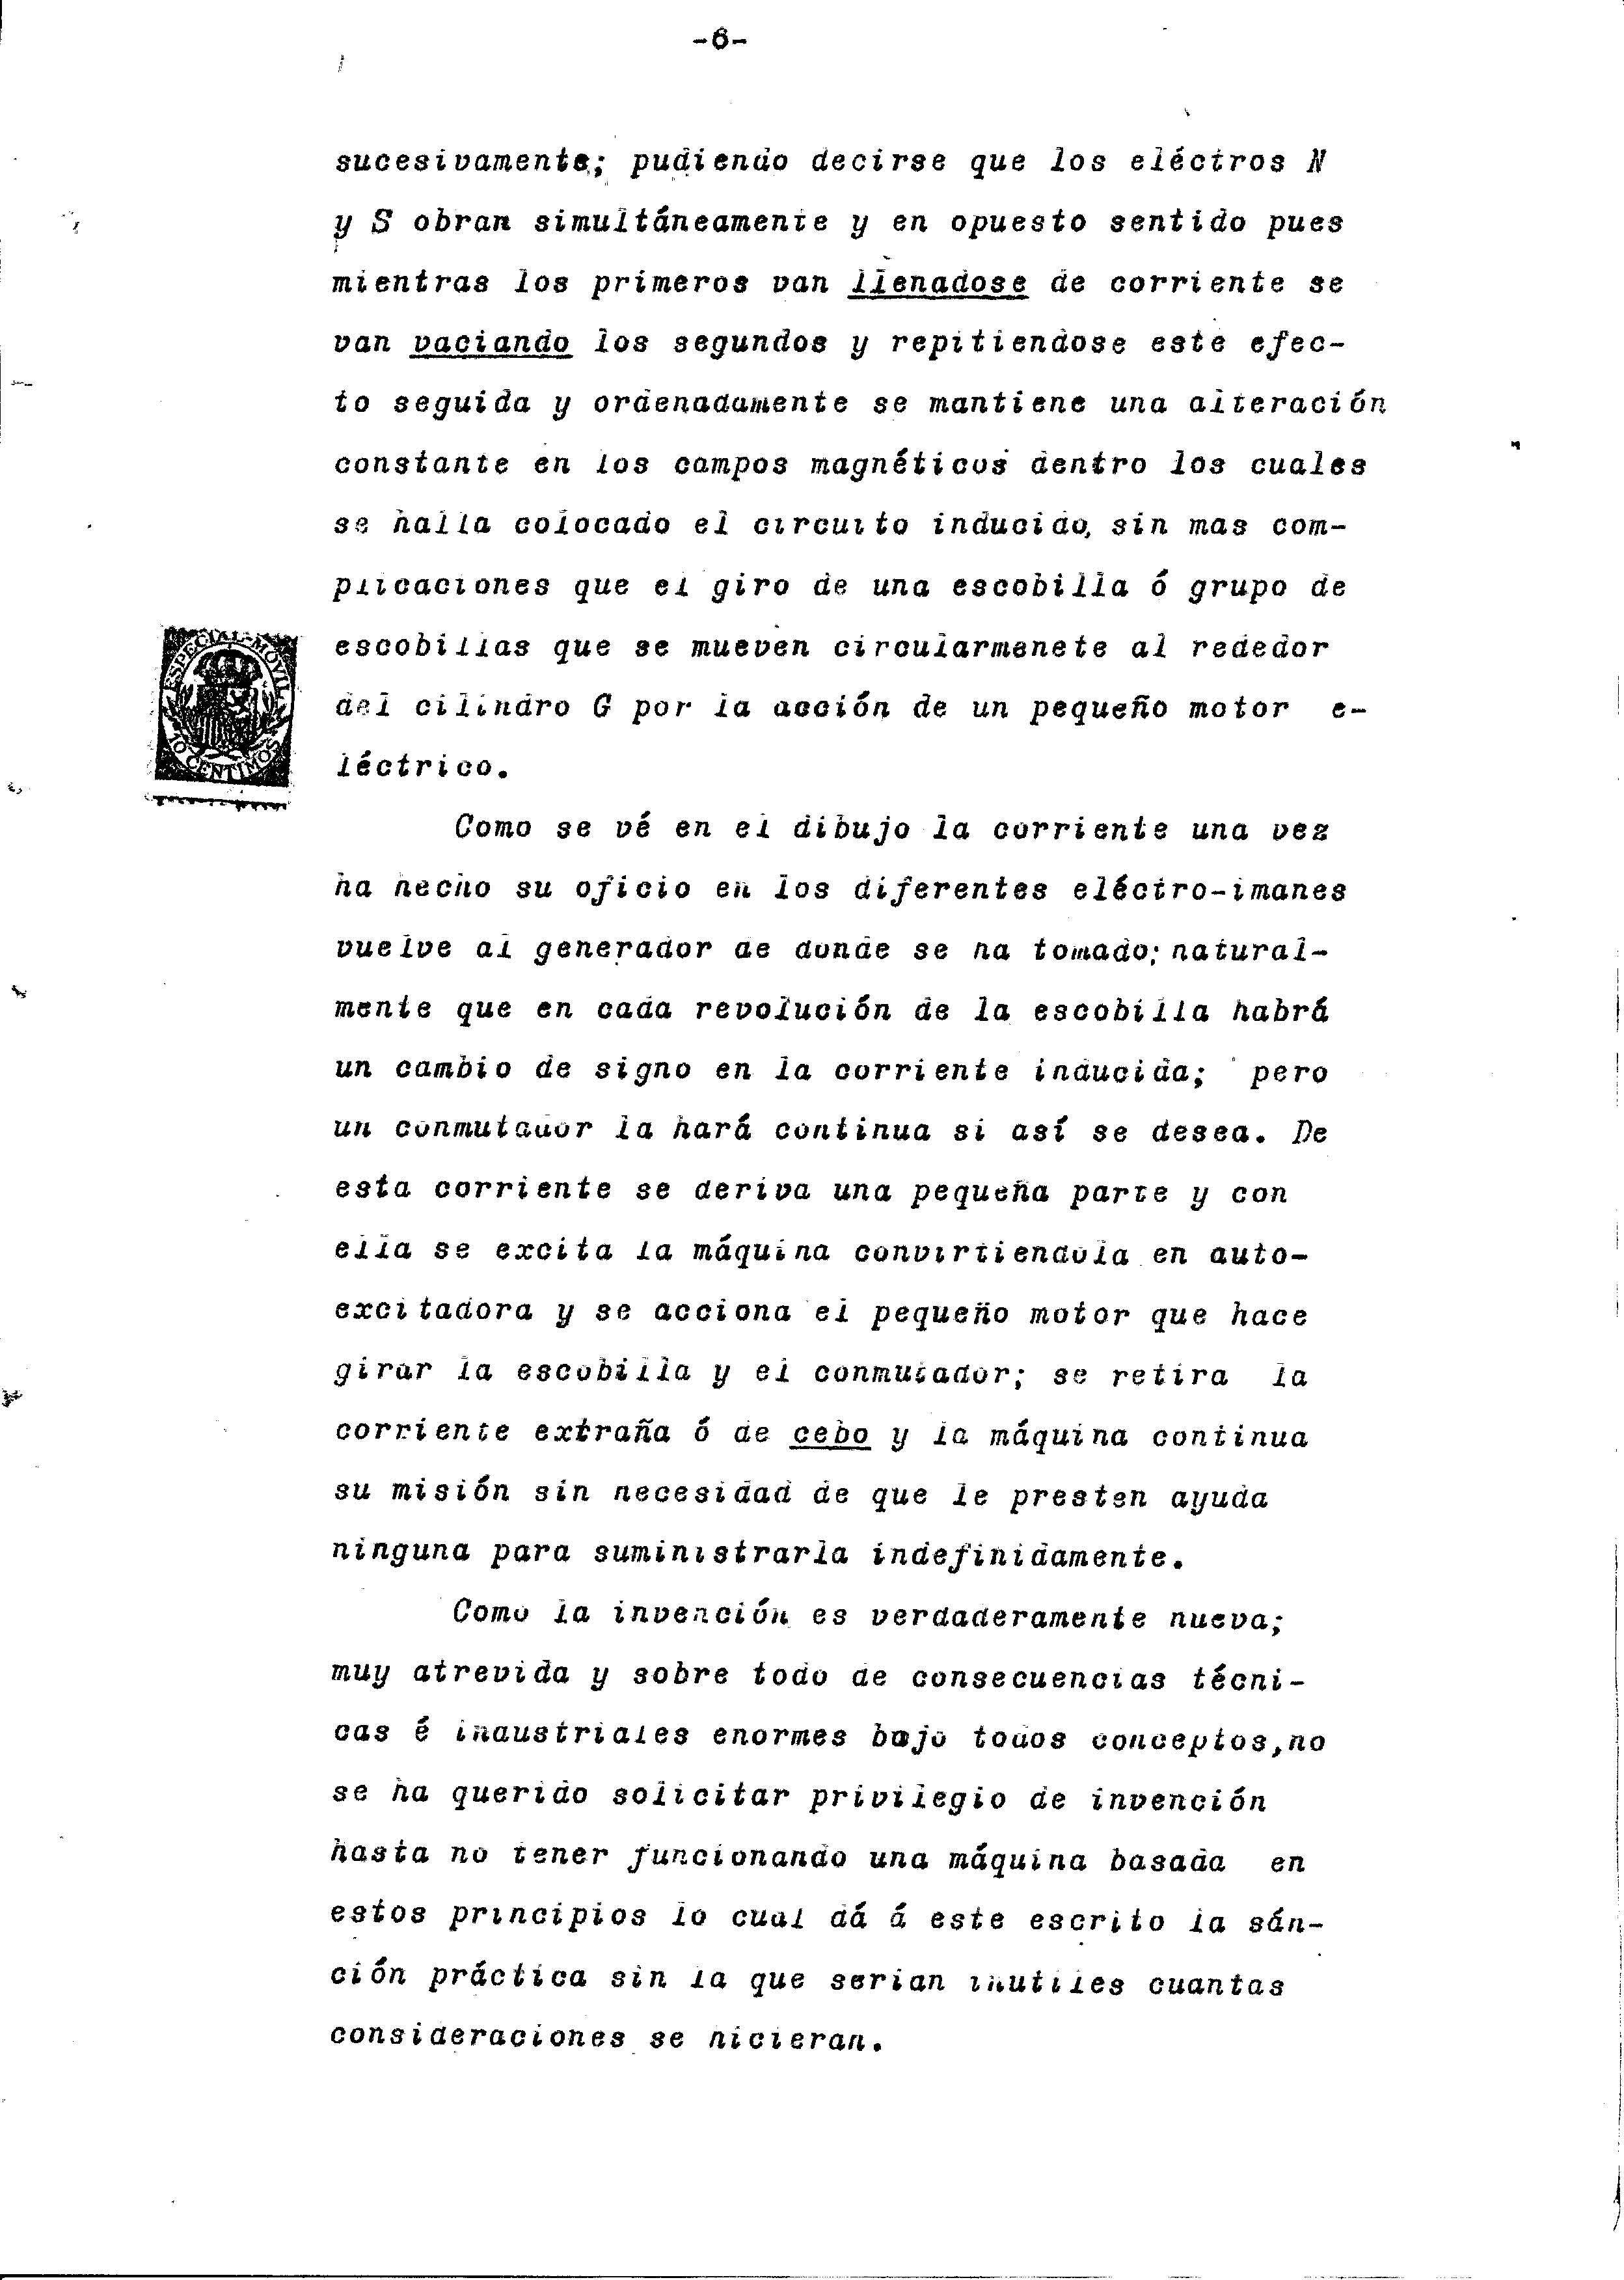 Clemente Figuera Patente 1908_Num_44267_scanned_OCR_Page_07.jpg